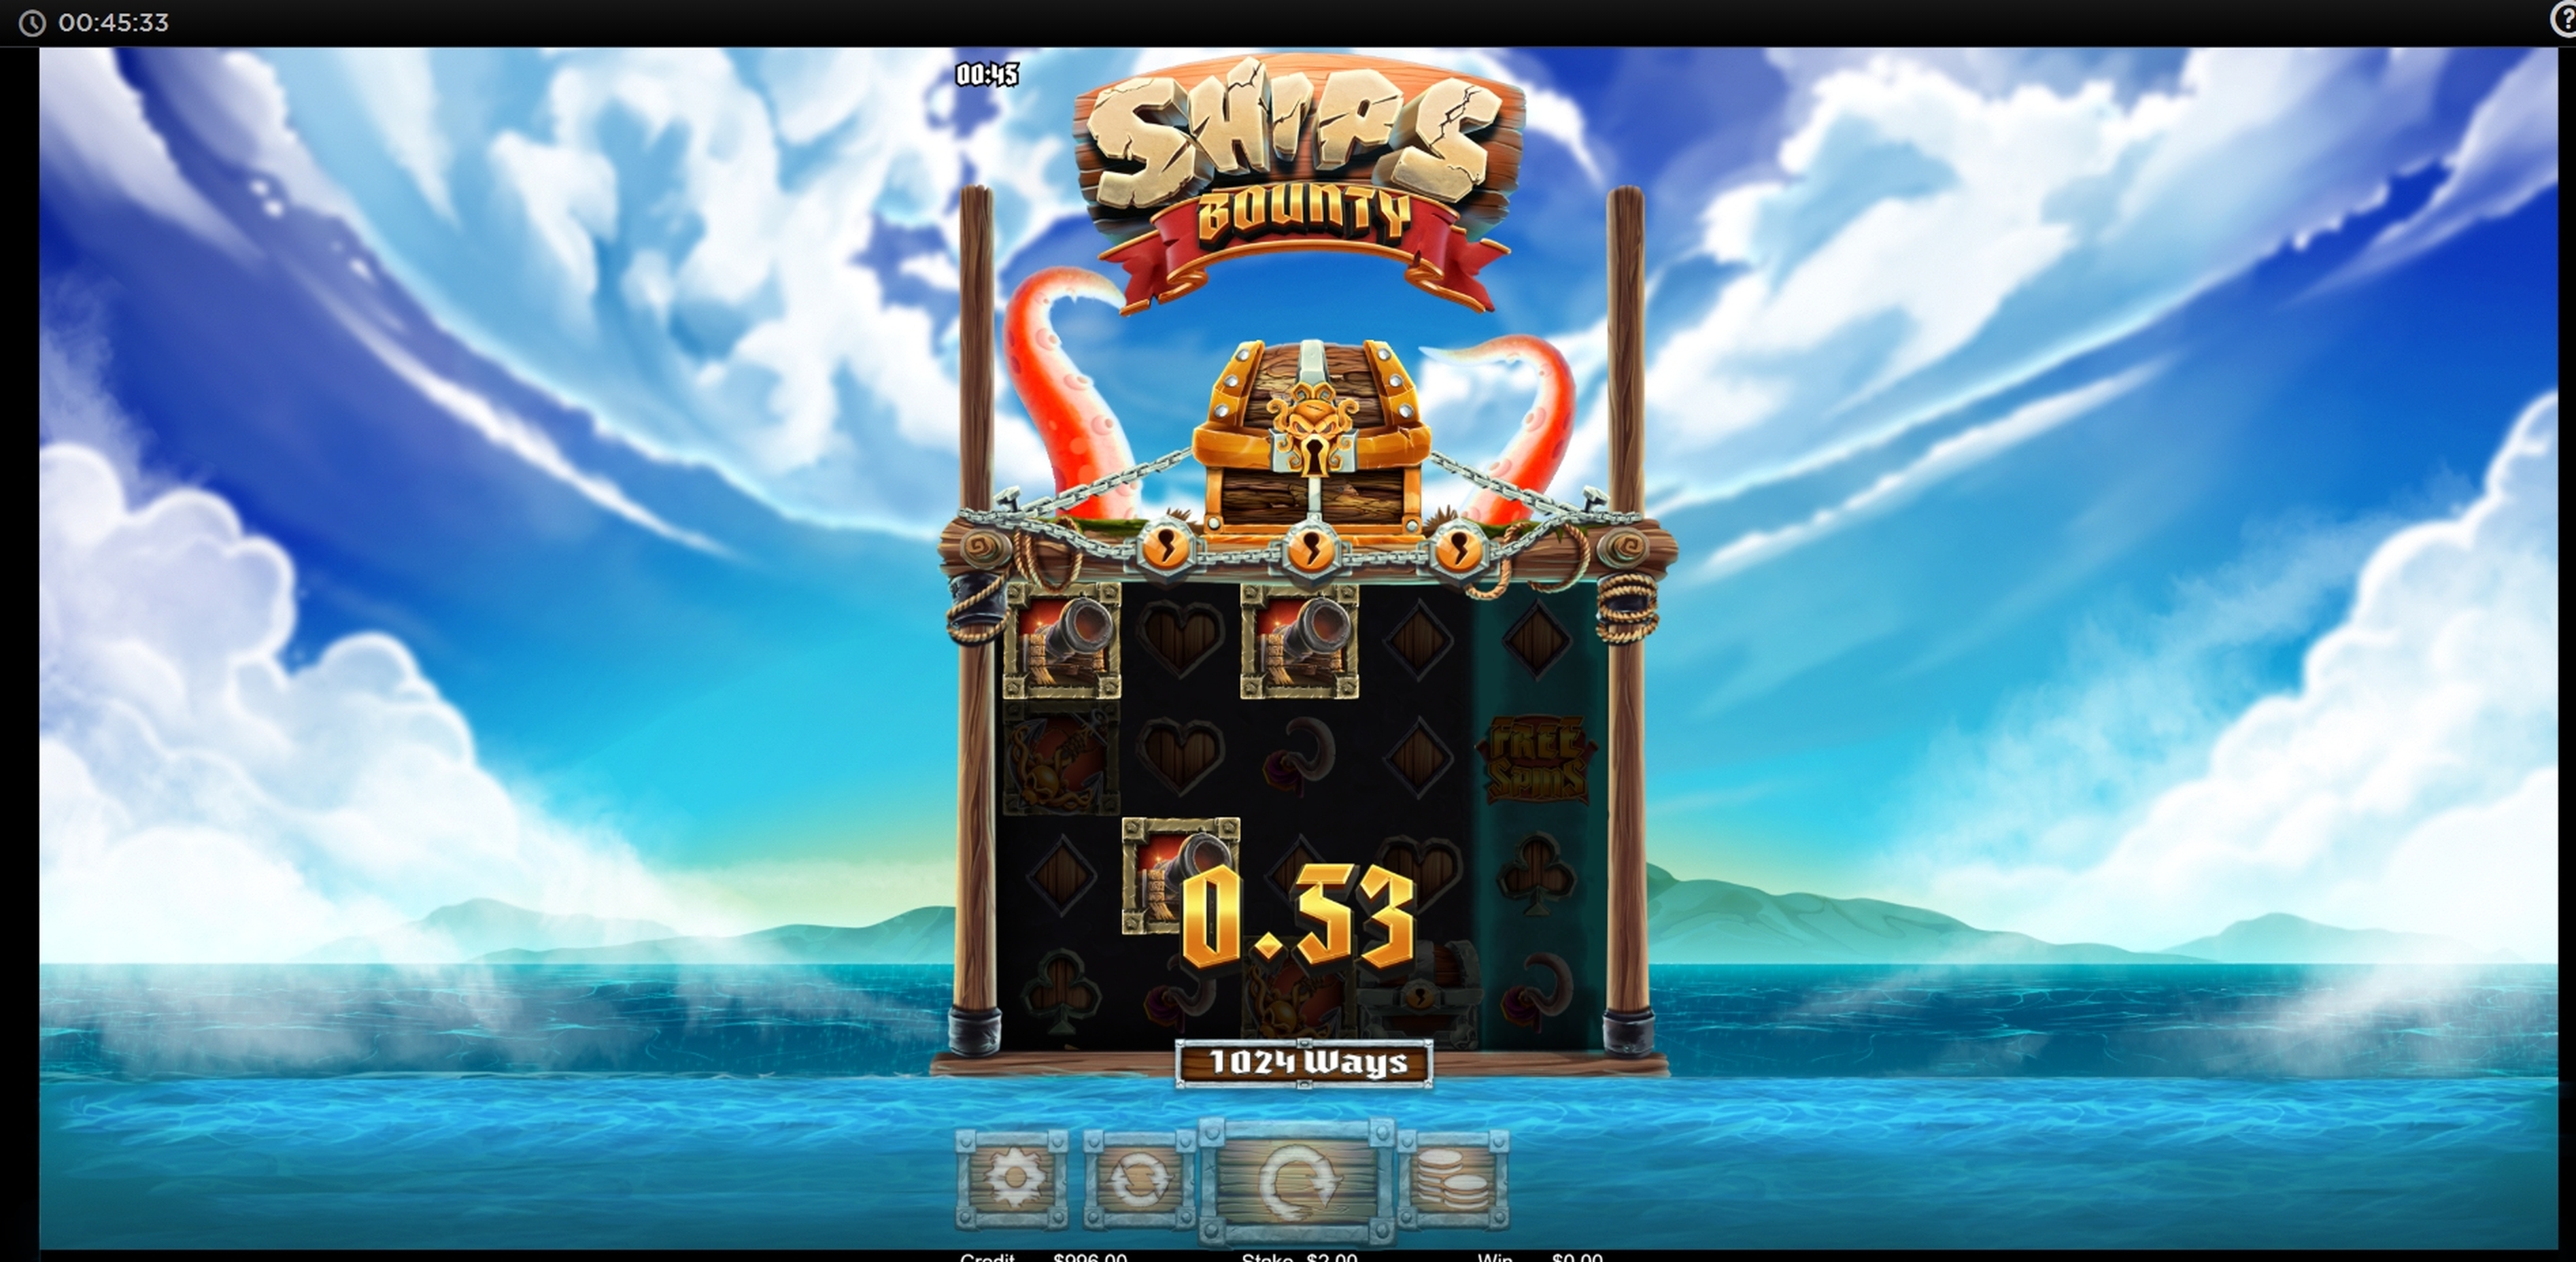 Win Money in Ships Bounty Free Slot Game by Live 5 Gaming